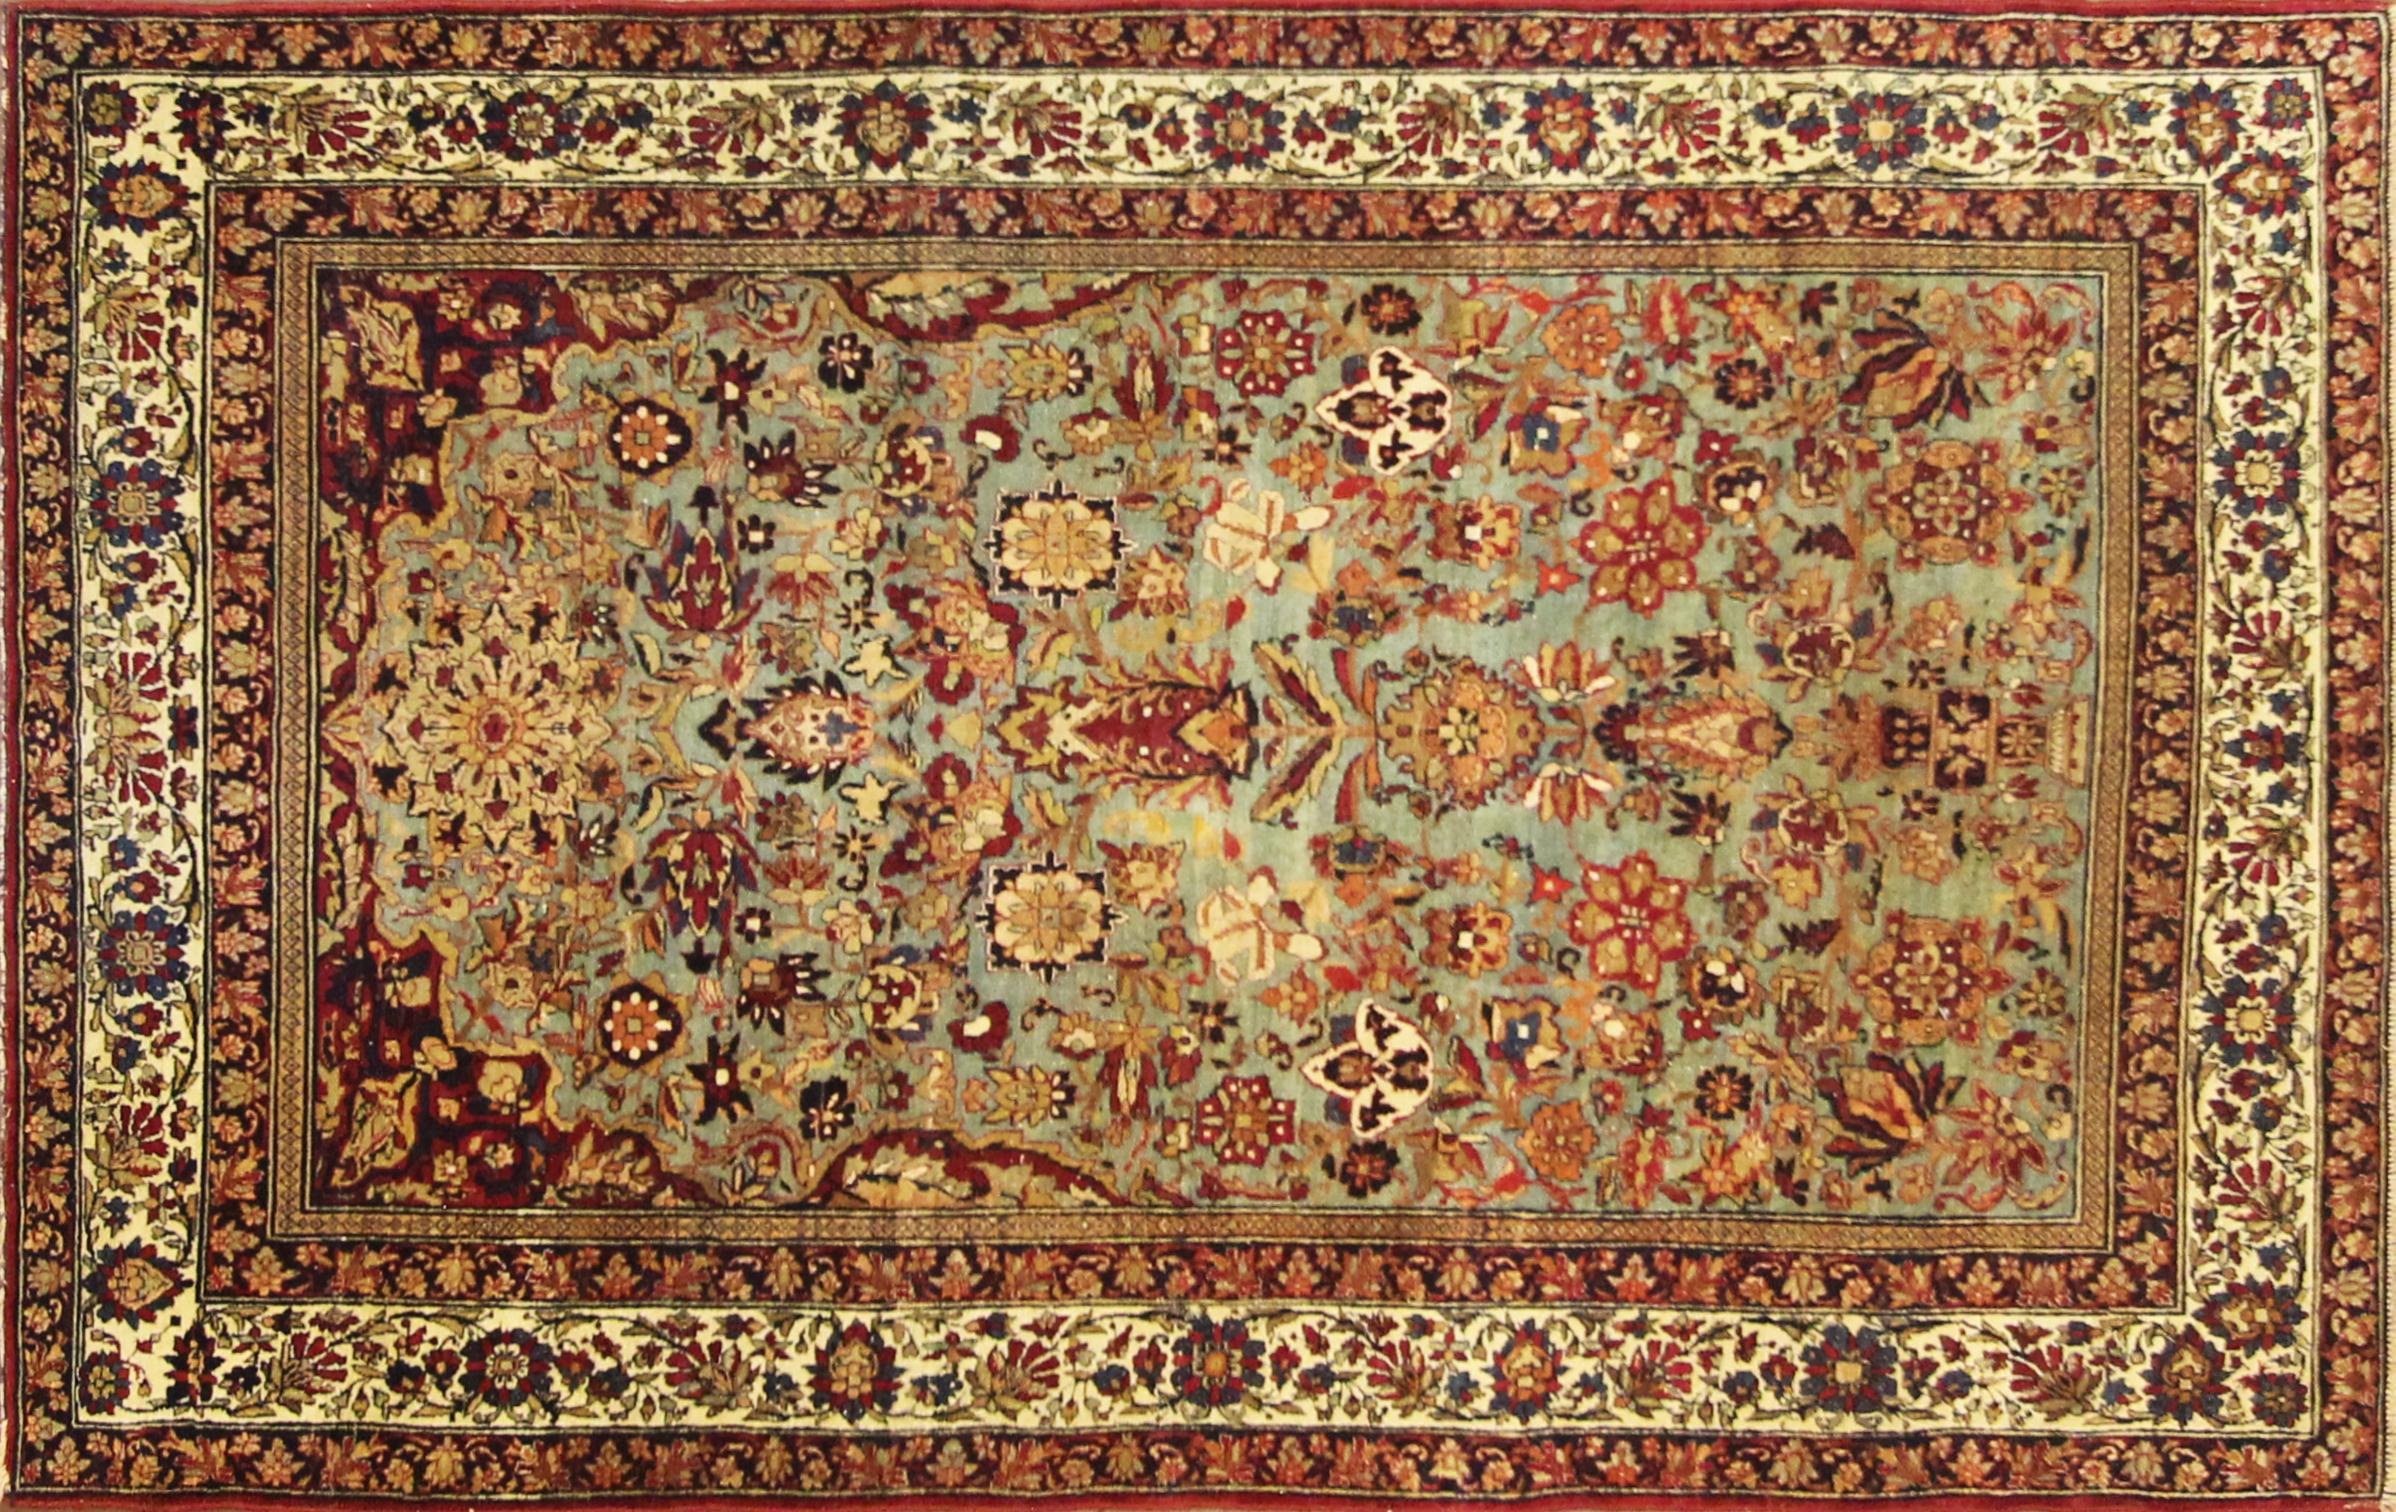 One of the oldest antique Isfahan Ahmad rug with unique blue green color.
Made of wool and very soft cotton like silk.
The Iranian city of Isfahan has long been one of the centres for production of the famous Persian carpet. Isfahani carpets are